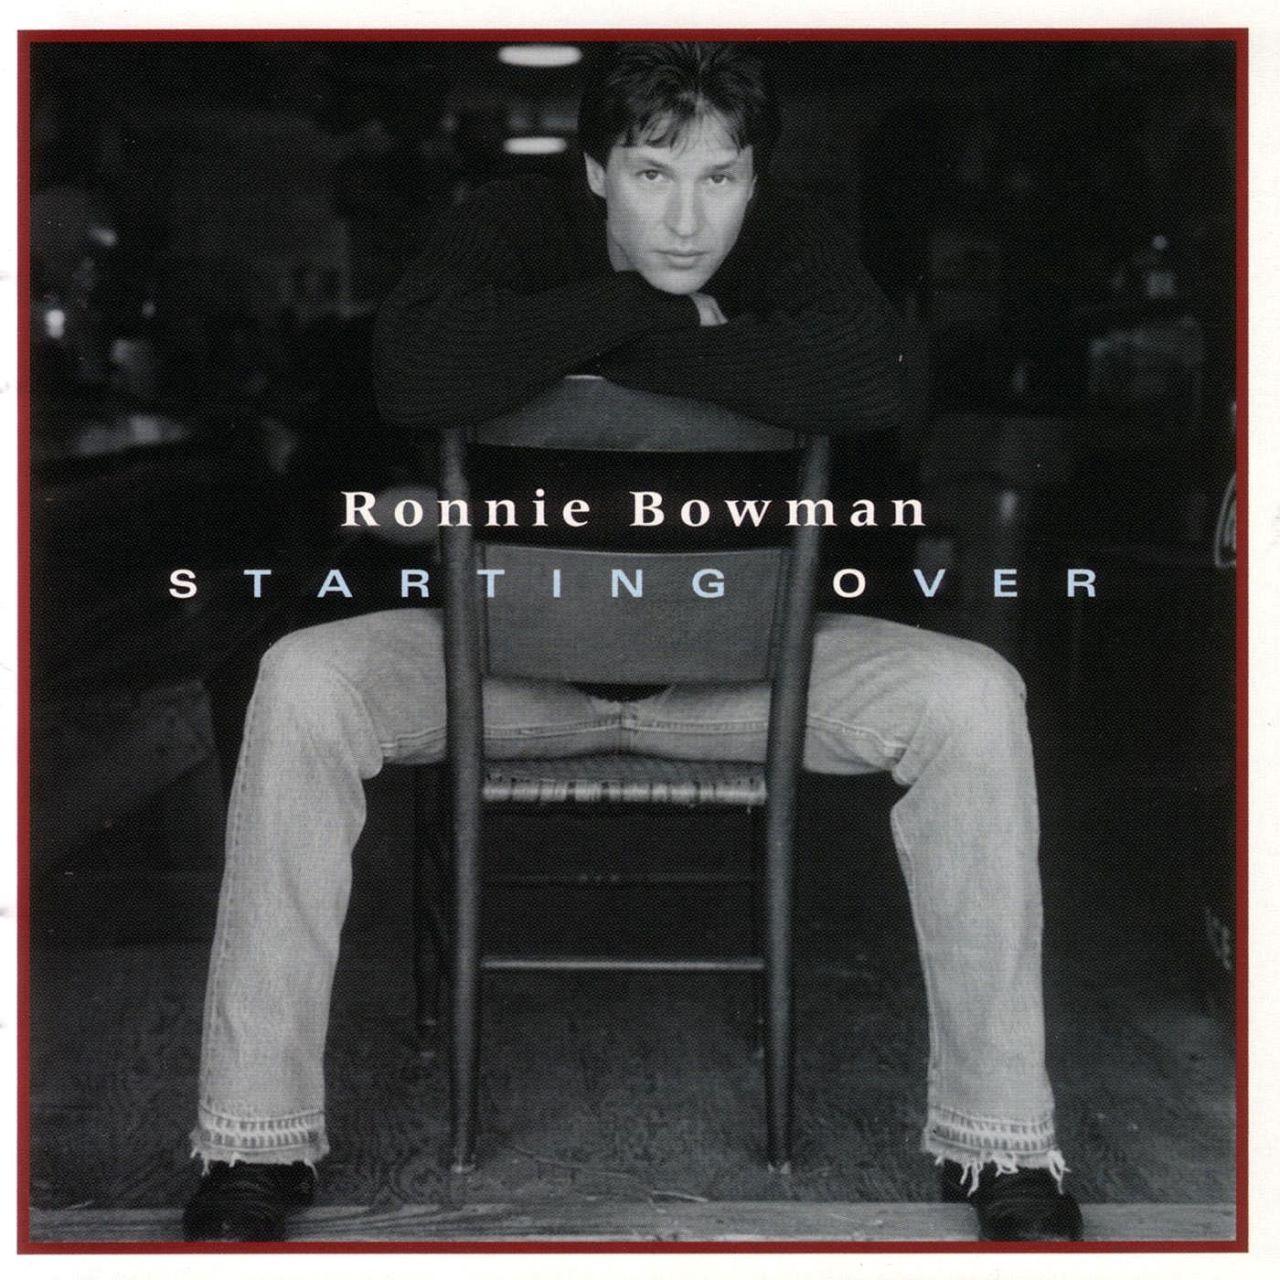 Ronnie Bowman - Starting Over cover album